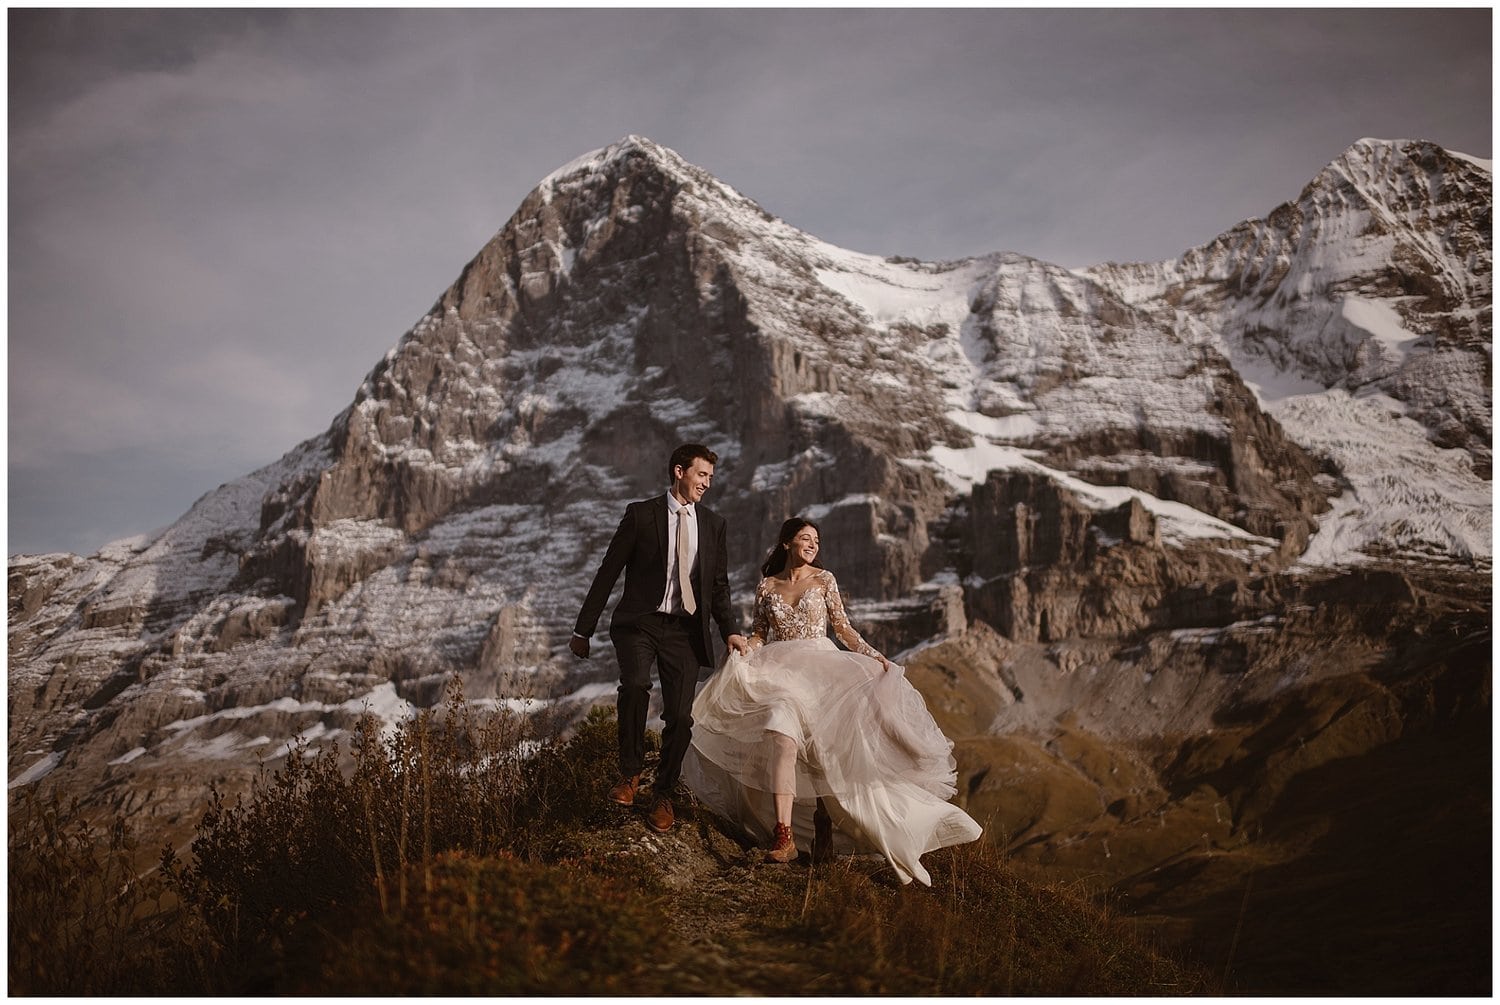 Bride and groom walk along trail with snow-capped mountains in background. 